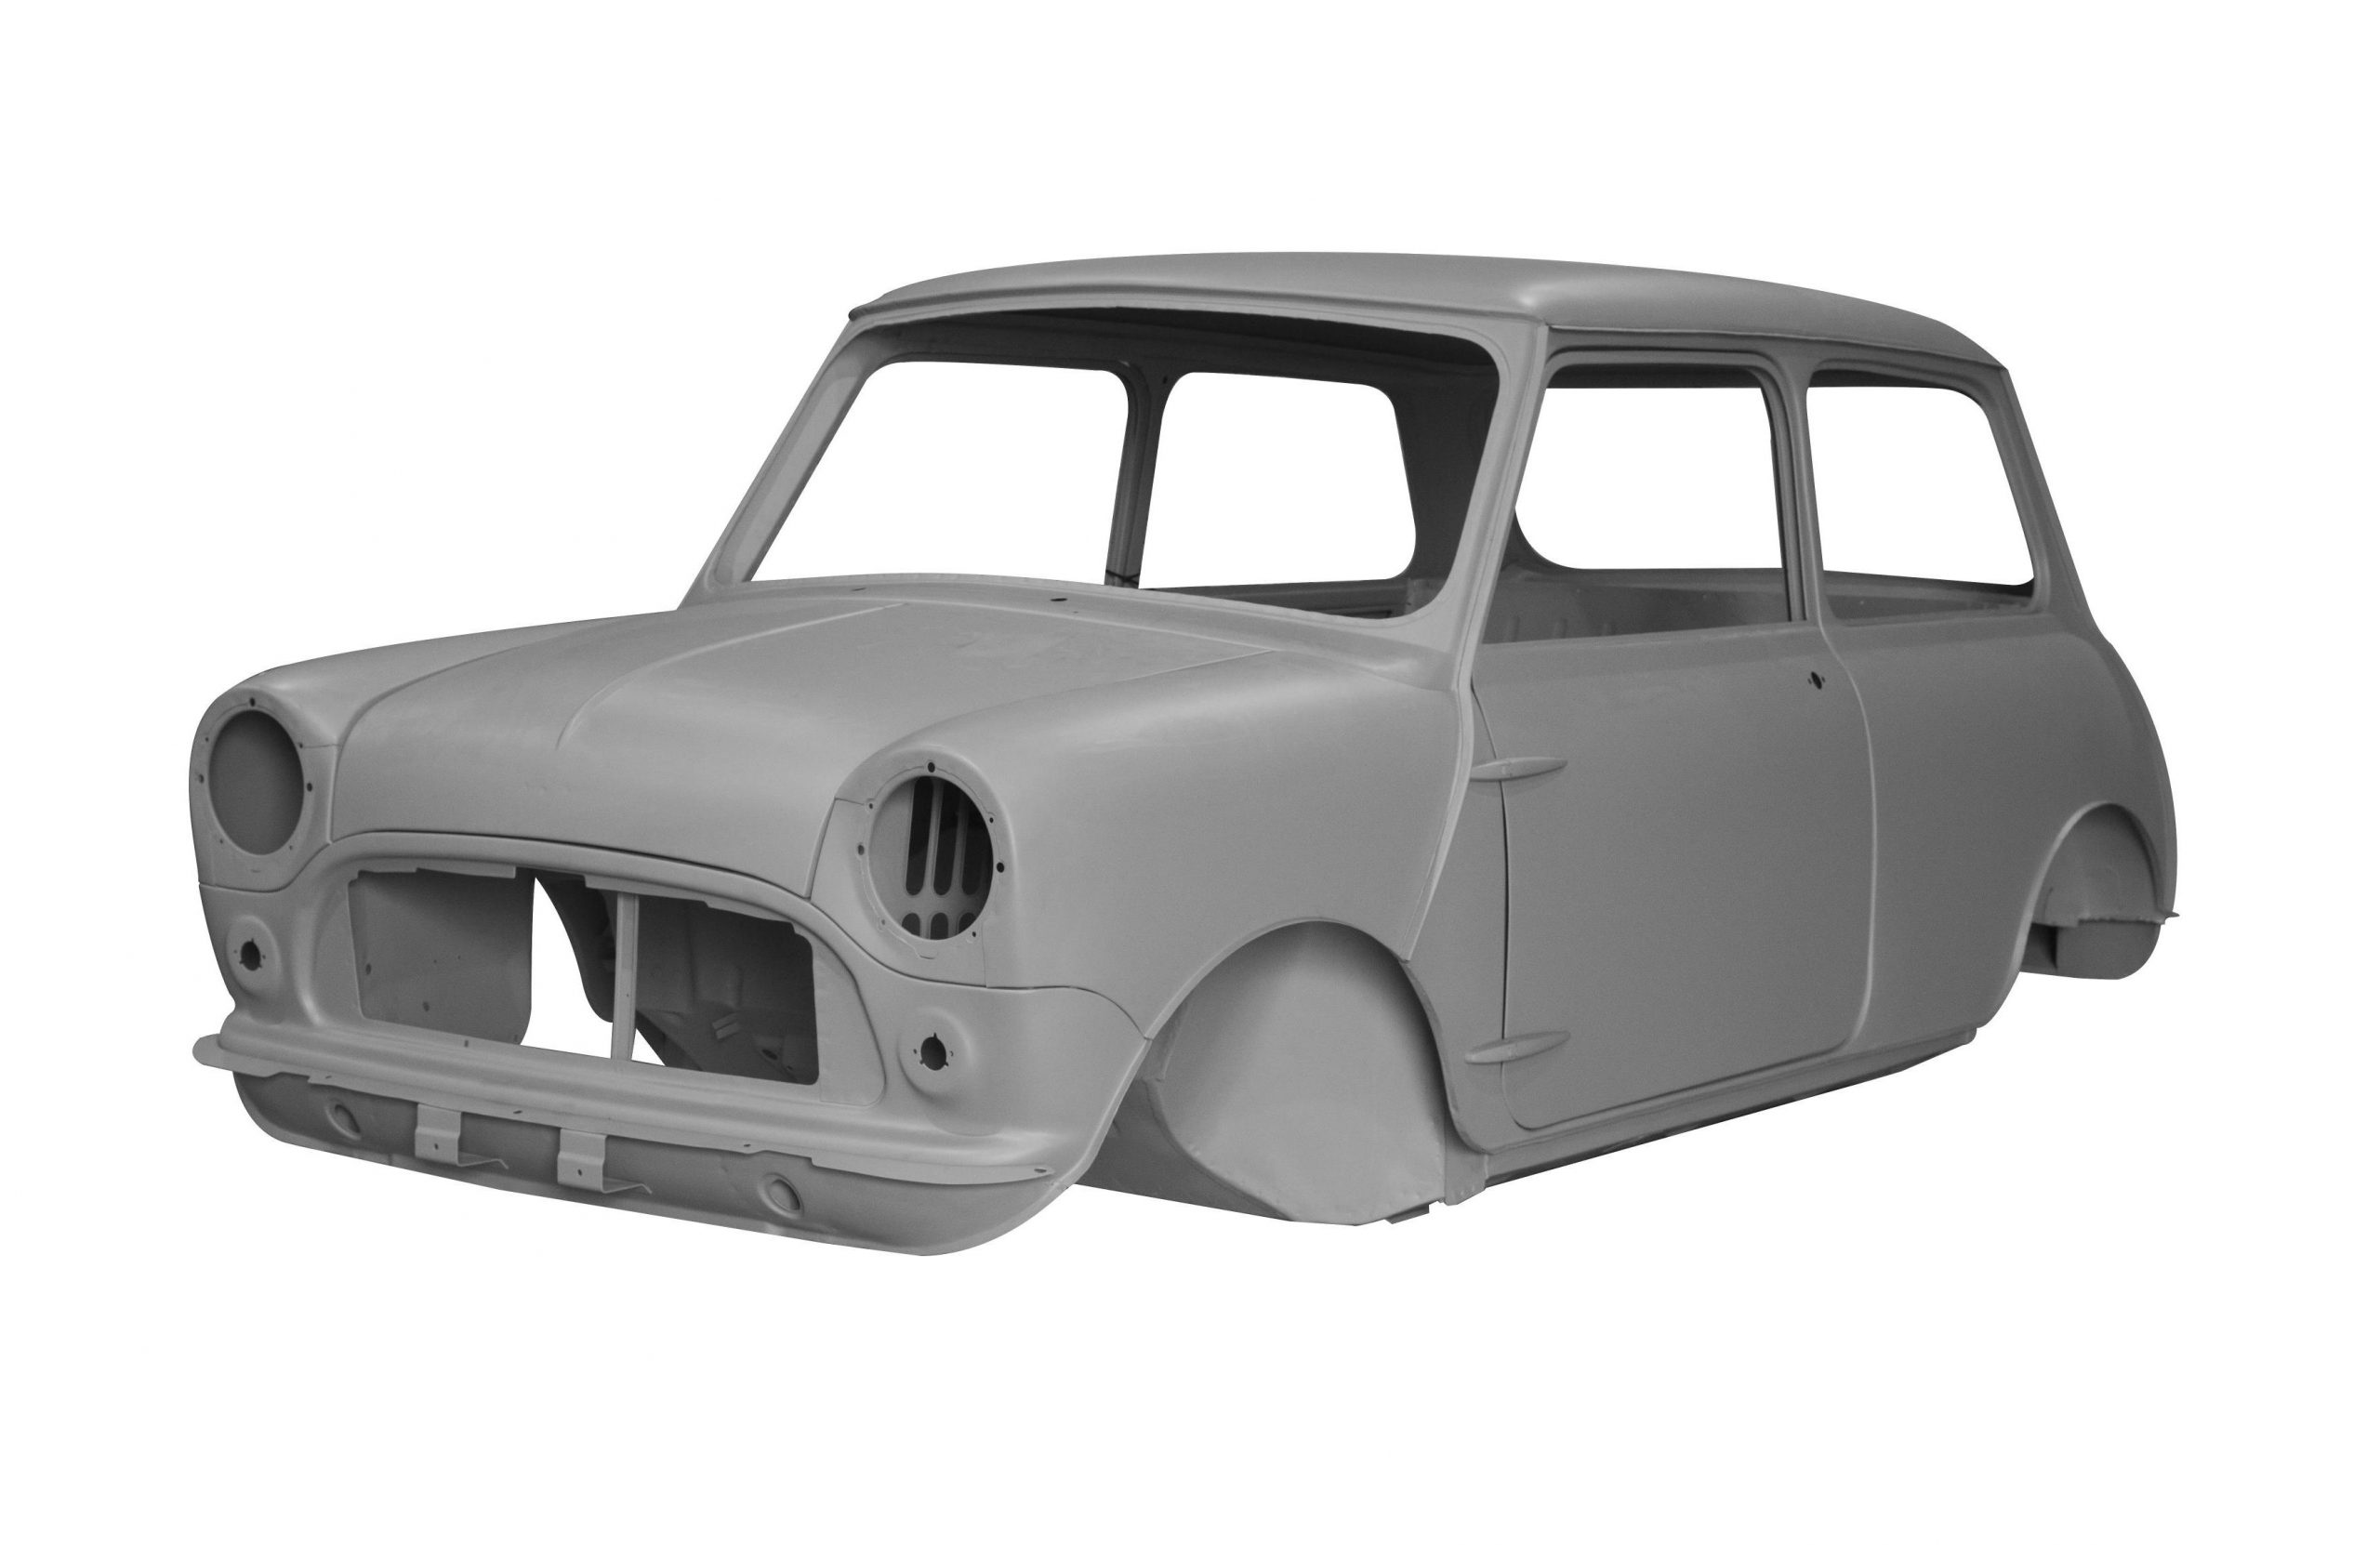 Classic Mini Cooper body shells being reproduced for fans